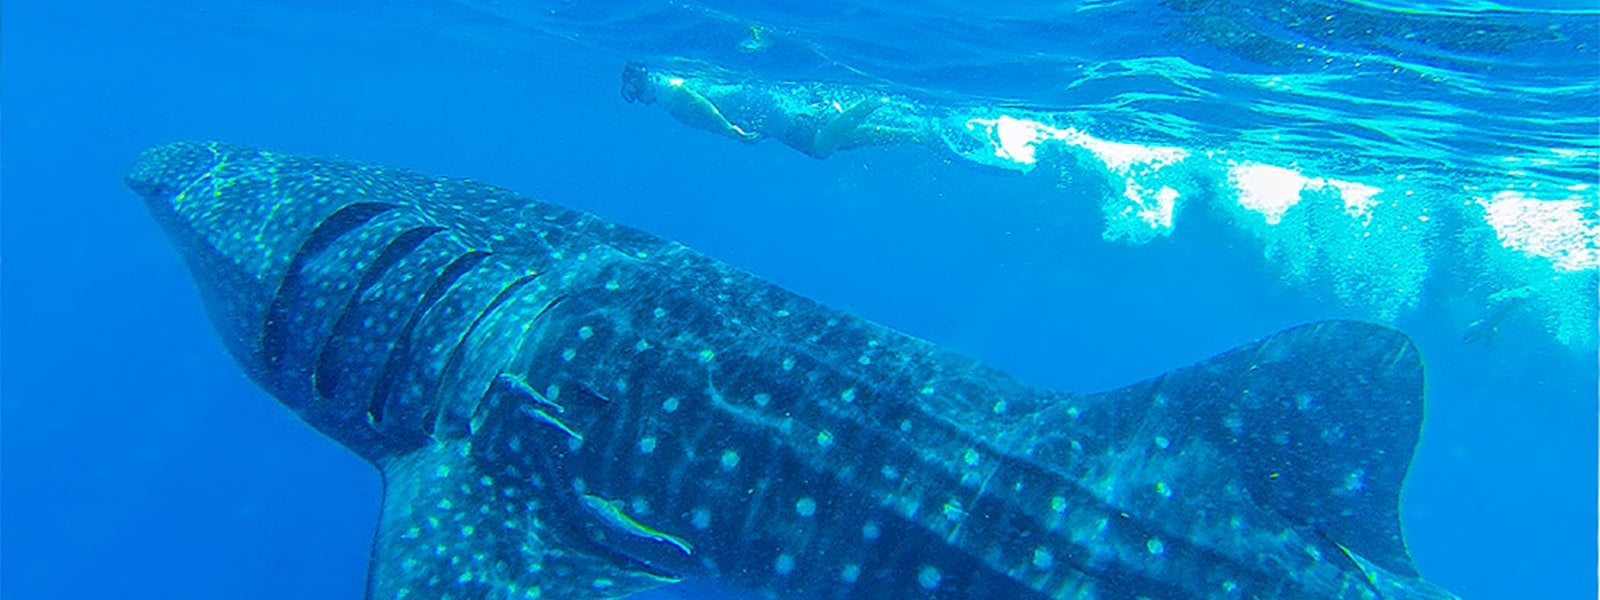 WATCH: Florida boat party visited by whale shark